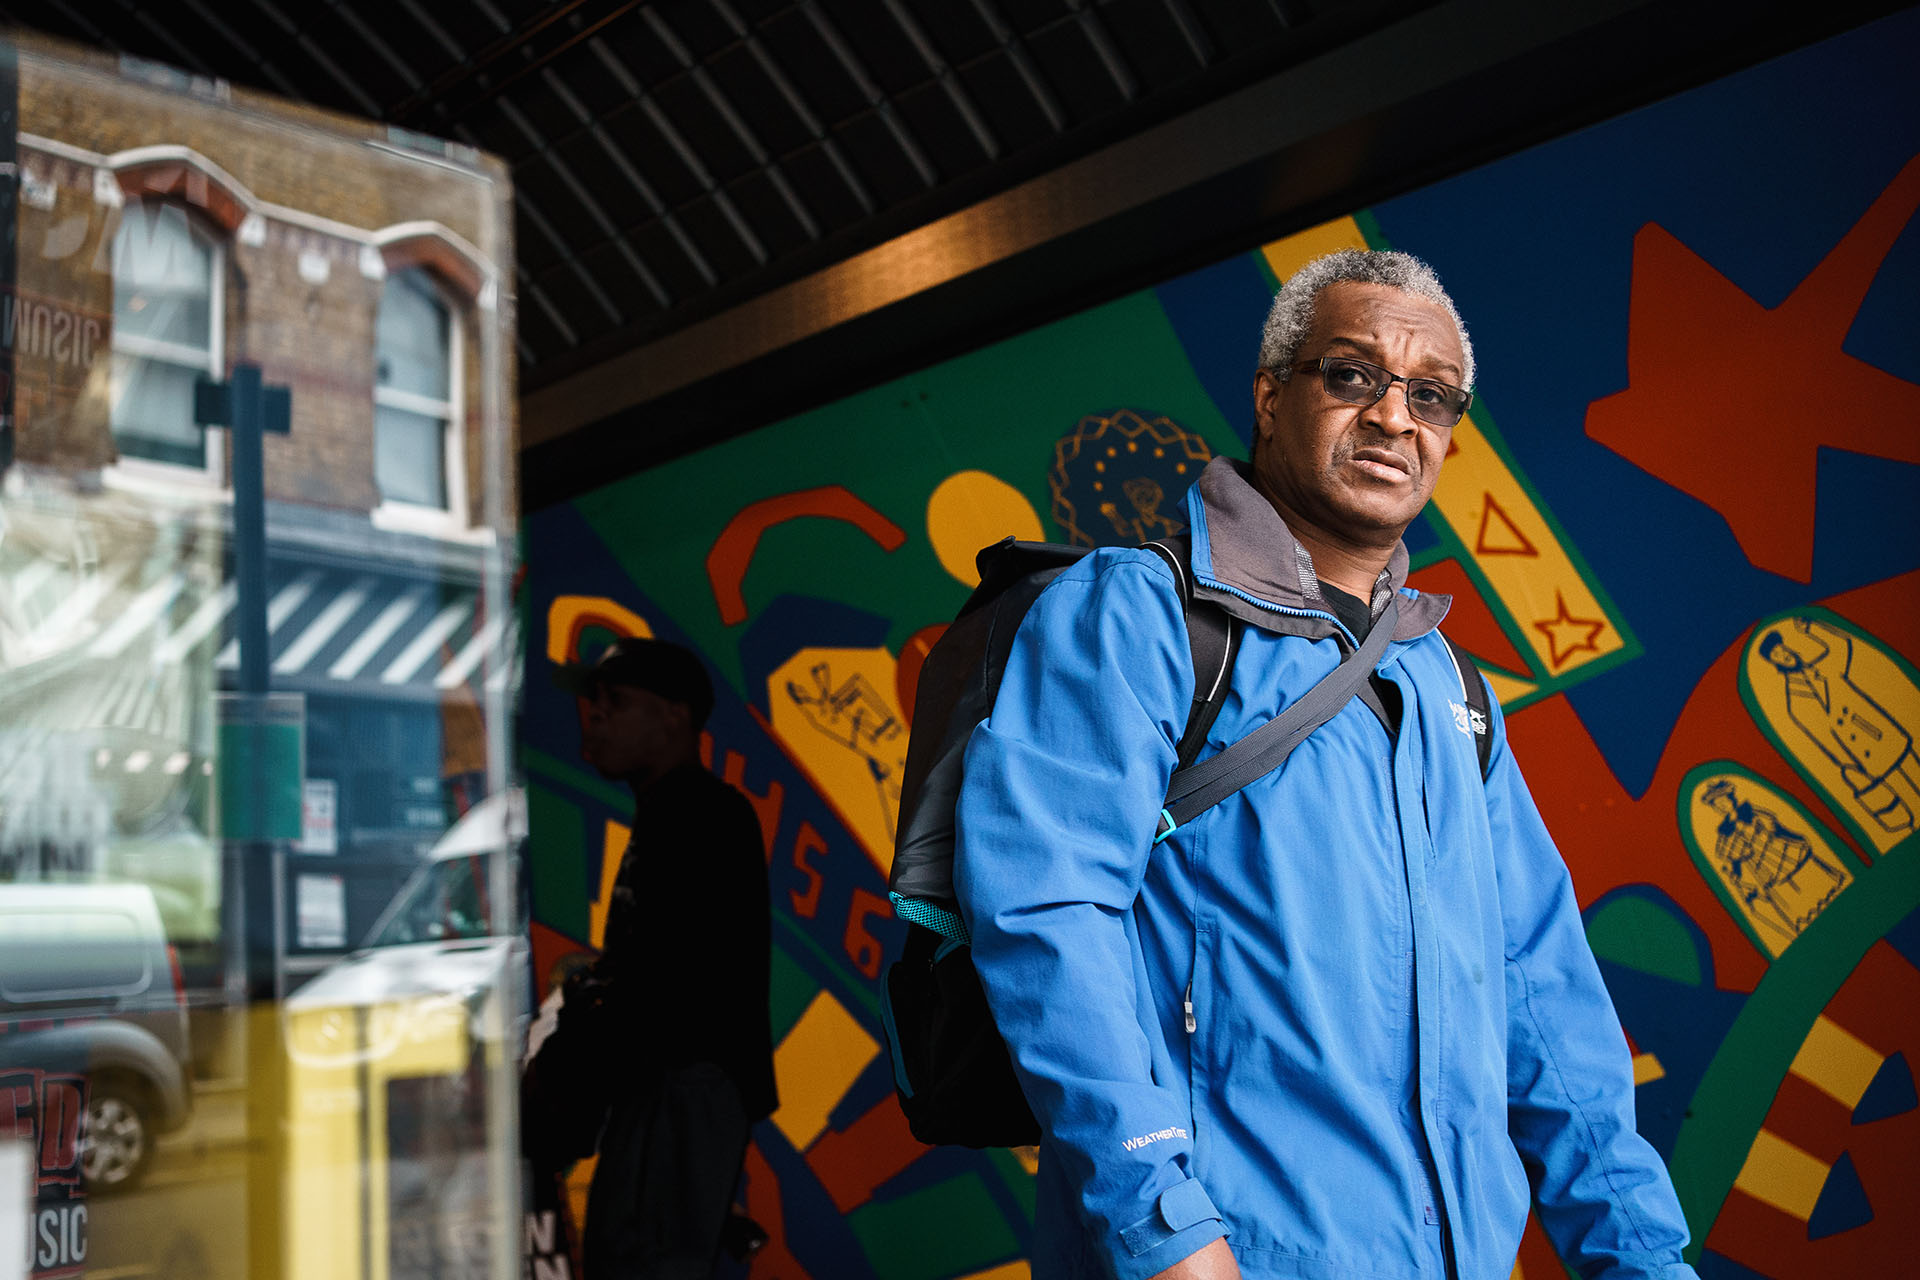 Man wearing a blue jacket walking past bright and colourful street art in Brixton